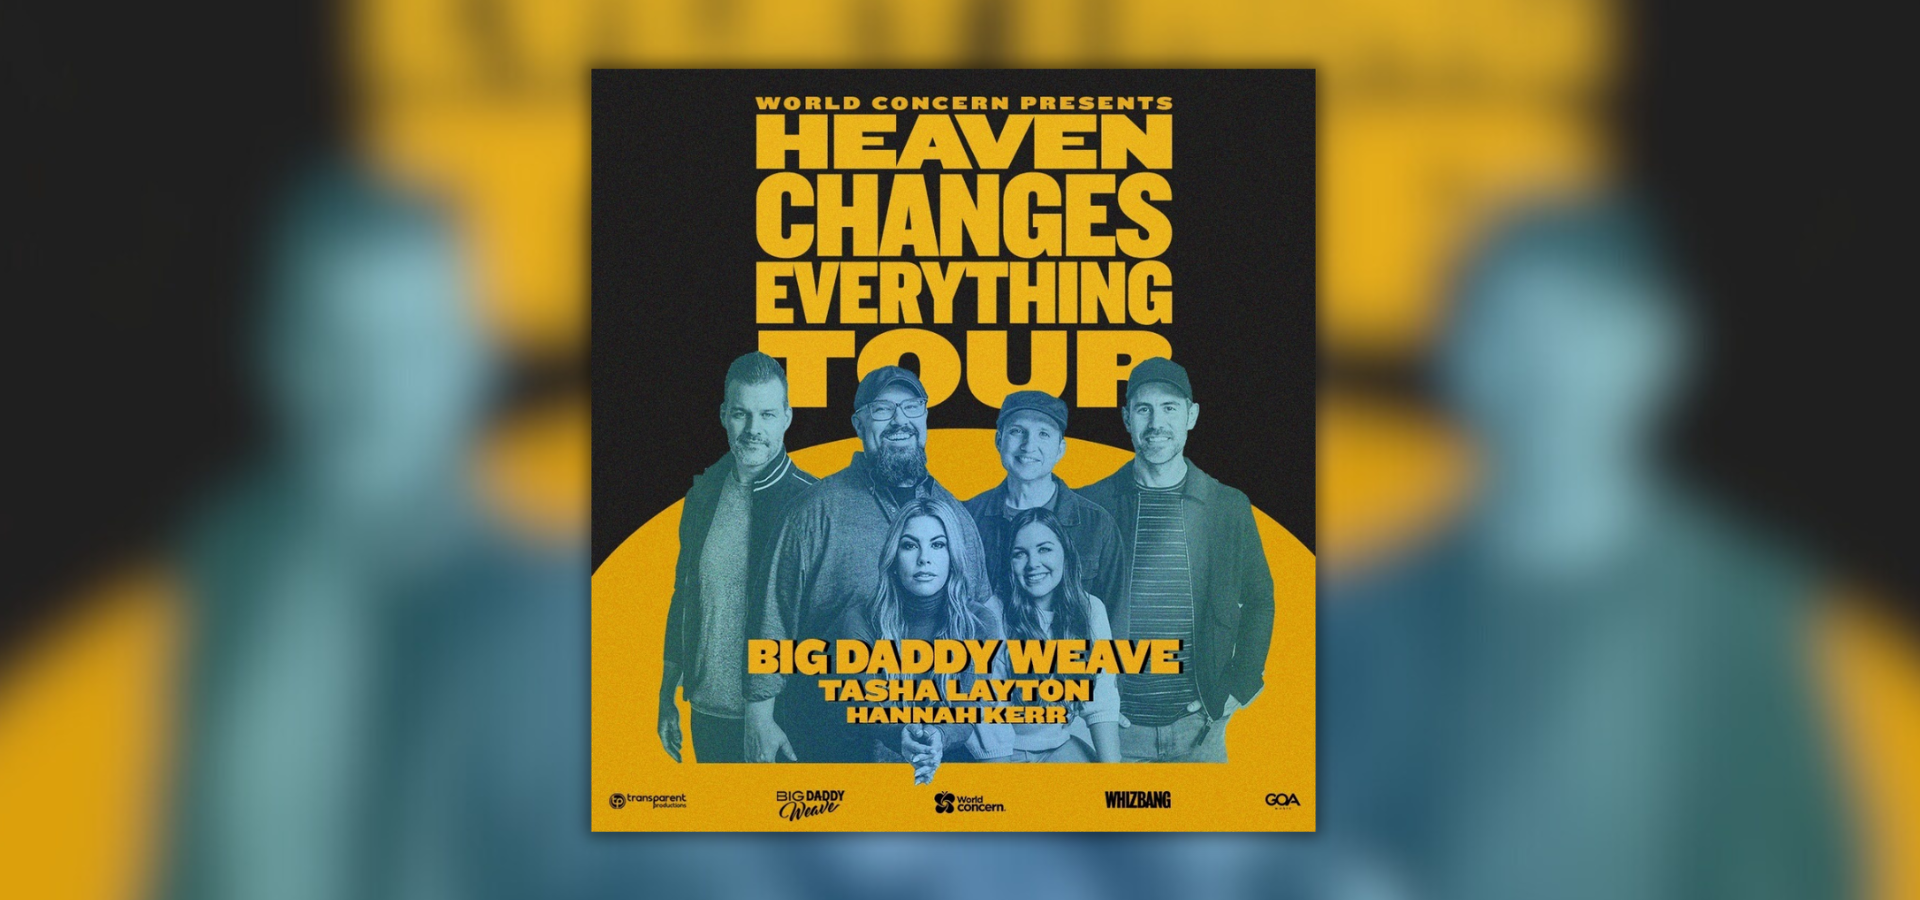 Big Daddy Weave Announces "Heaven Changes Everything Tour" with Tasha Layton and Hannah Kerr